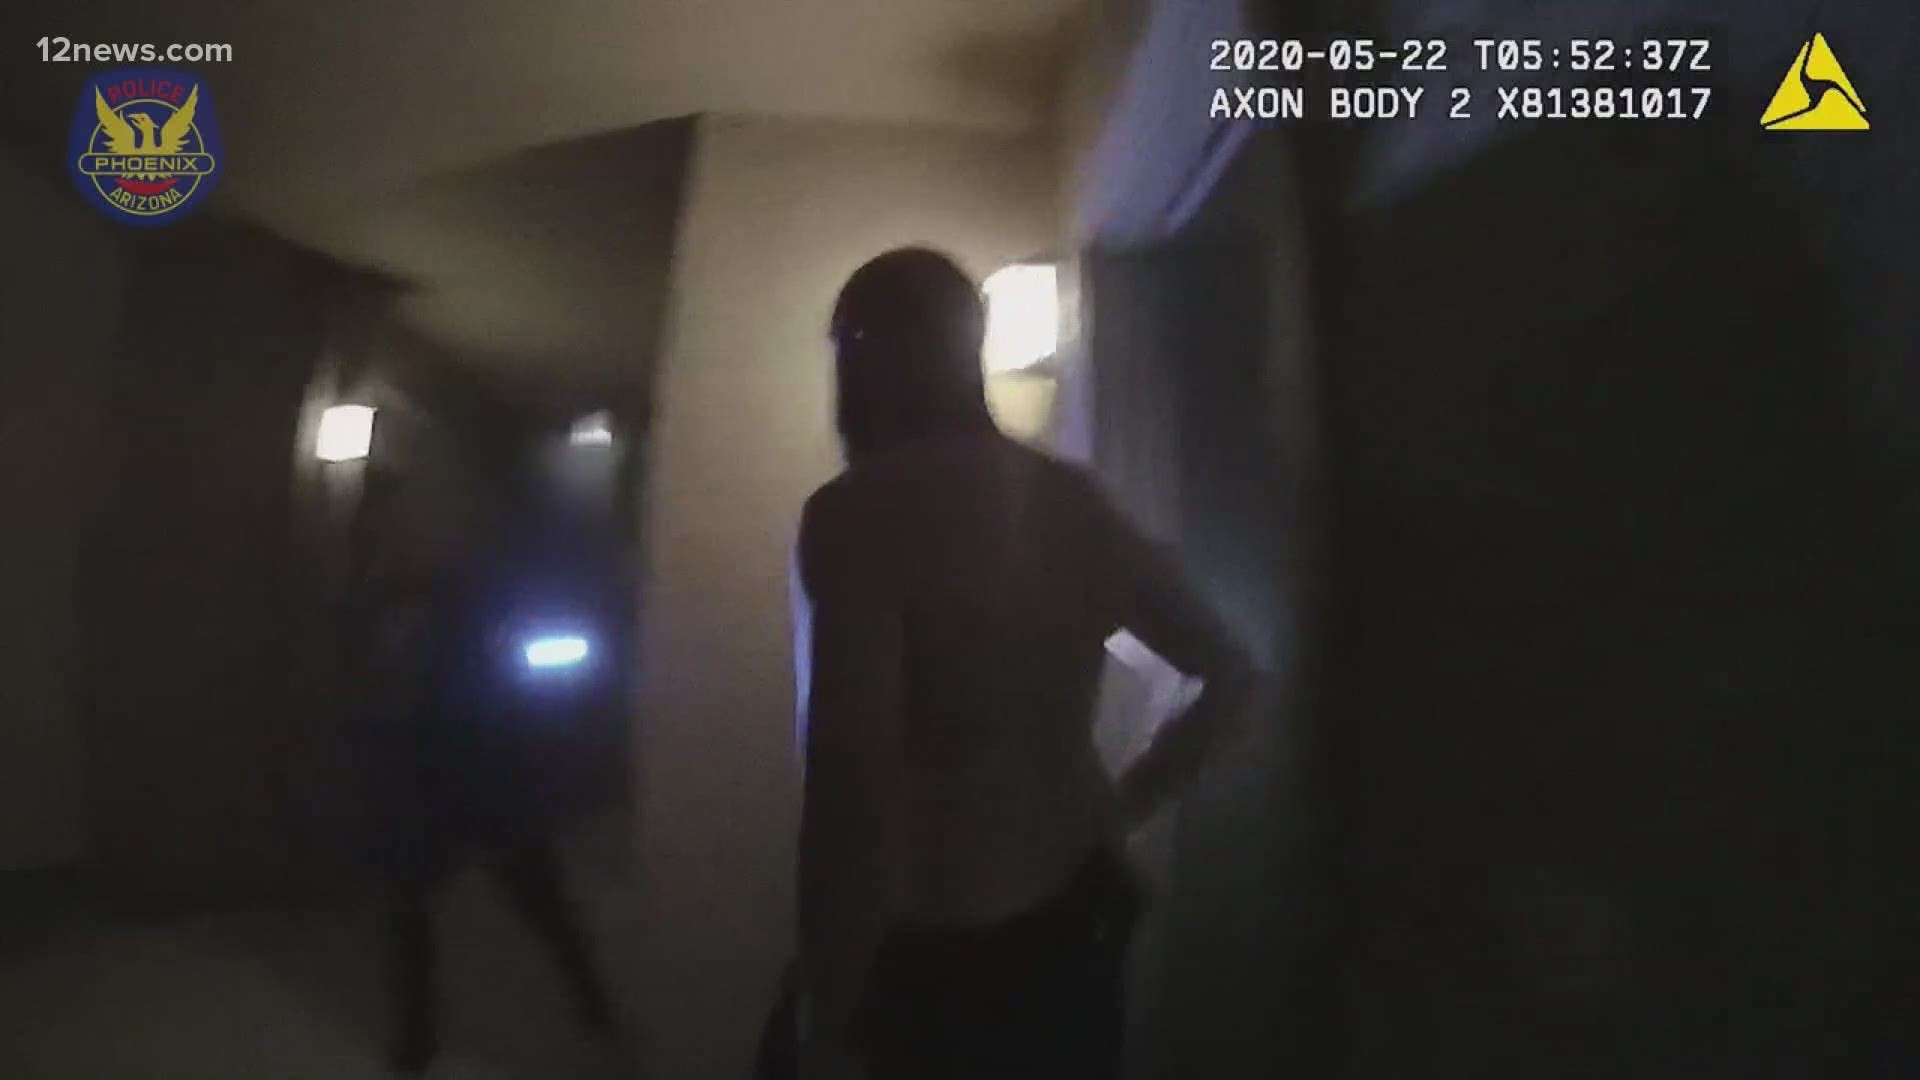 Newly released police video shows the moments officers shot and killed Ryan Whitaker back in May during a domestic disturbance call.